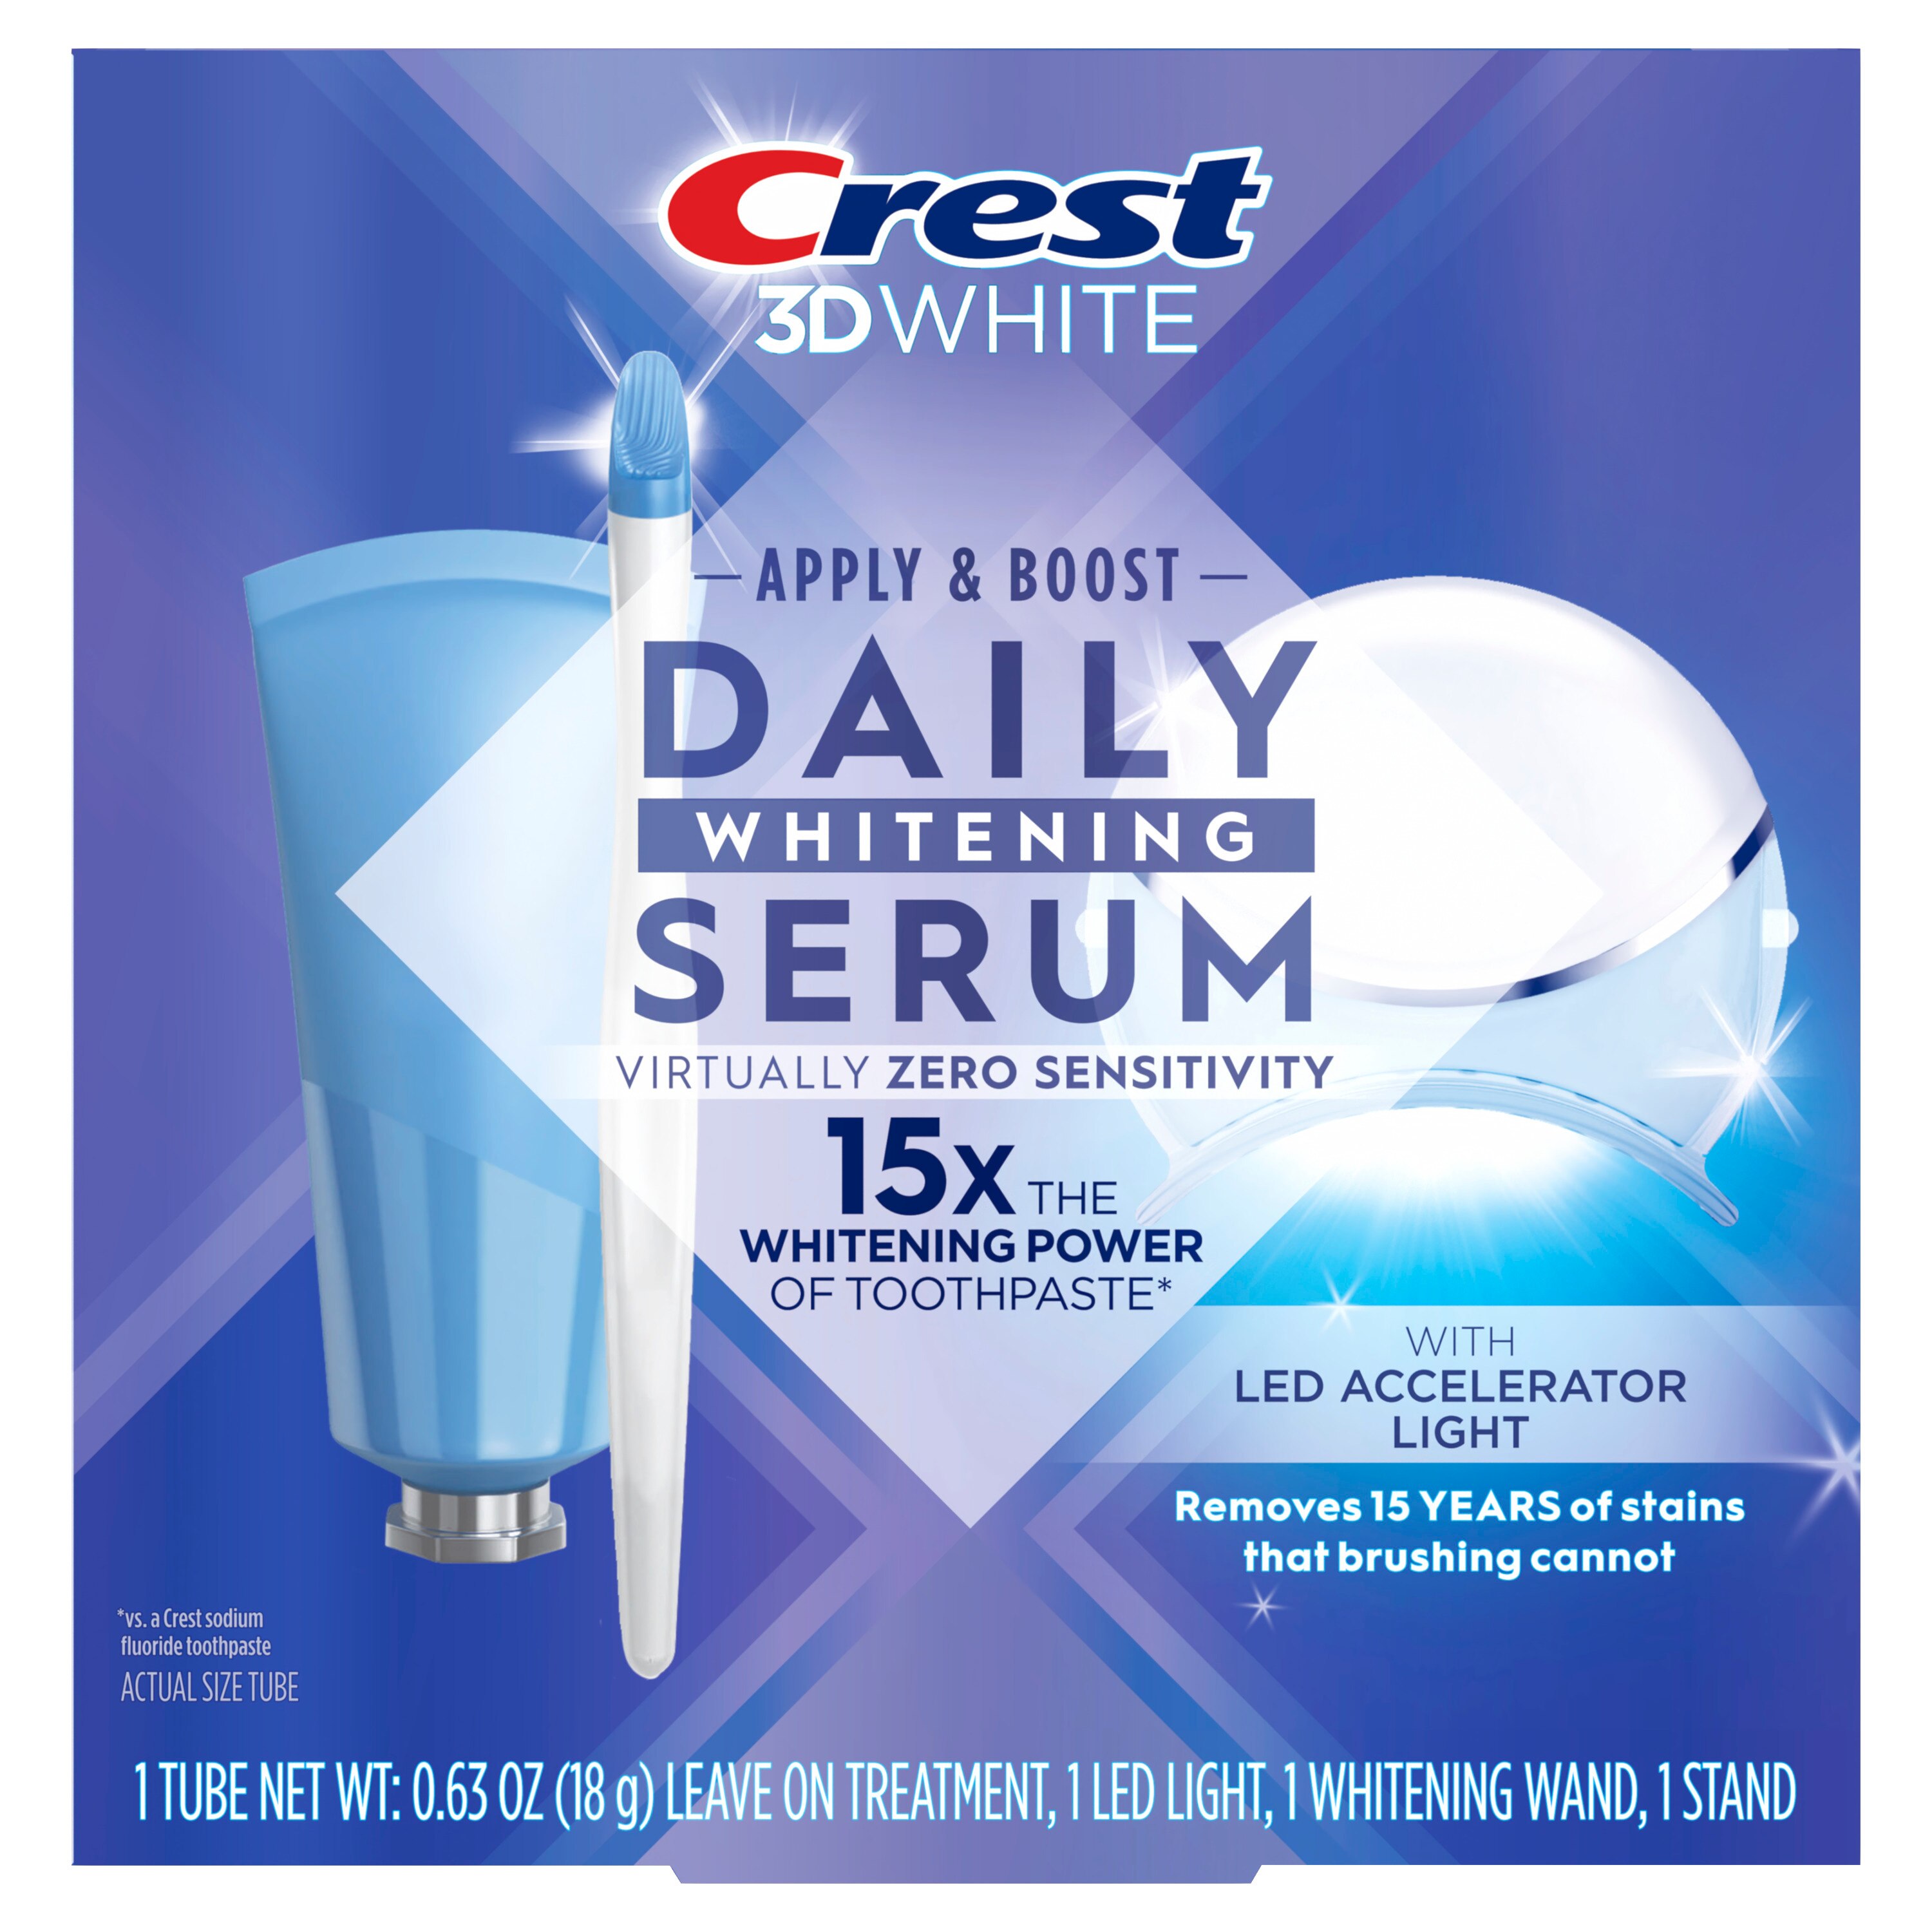 Crest 3D White Daily Whitening Serum Treatment with LED Accelerator Light